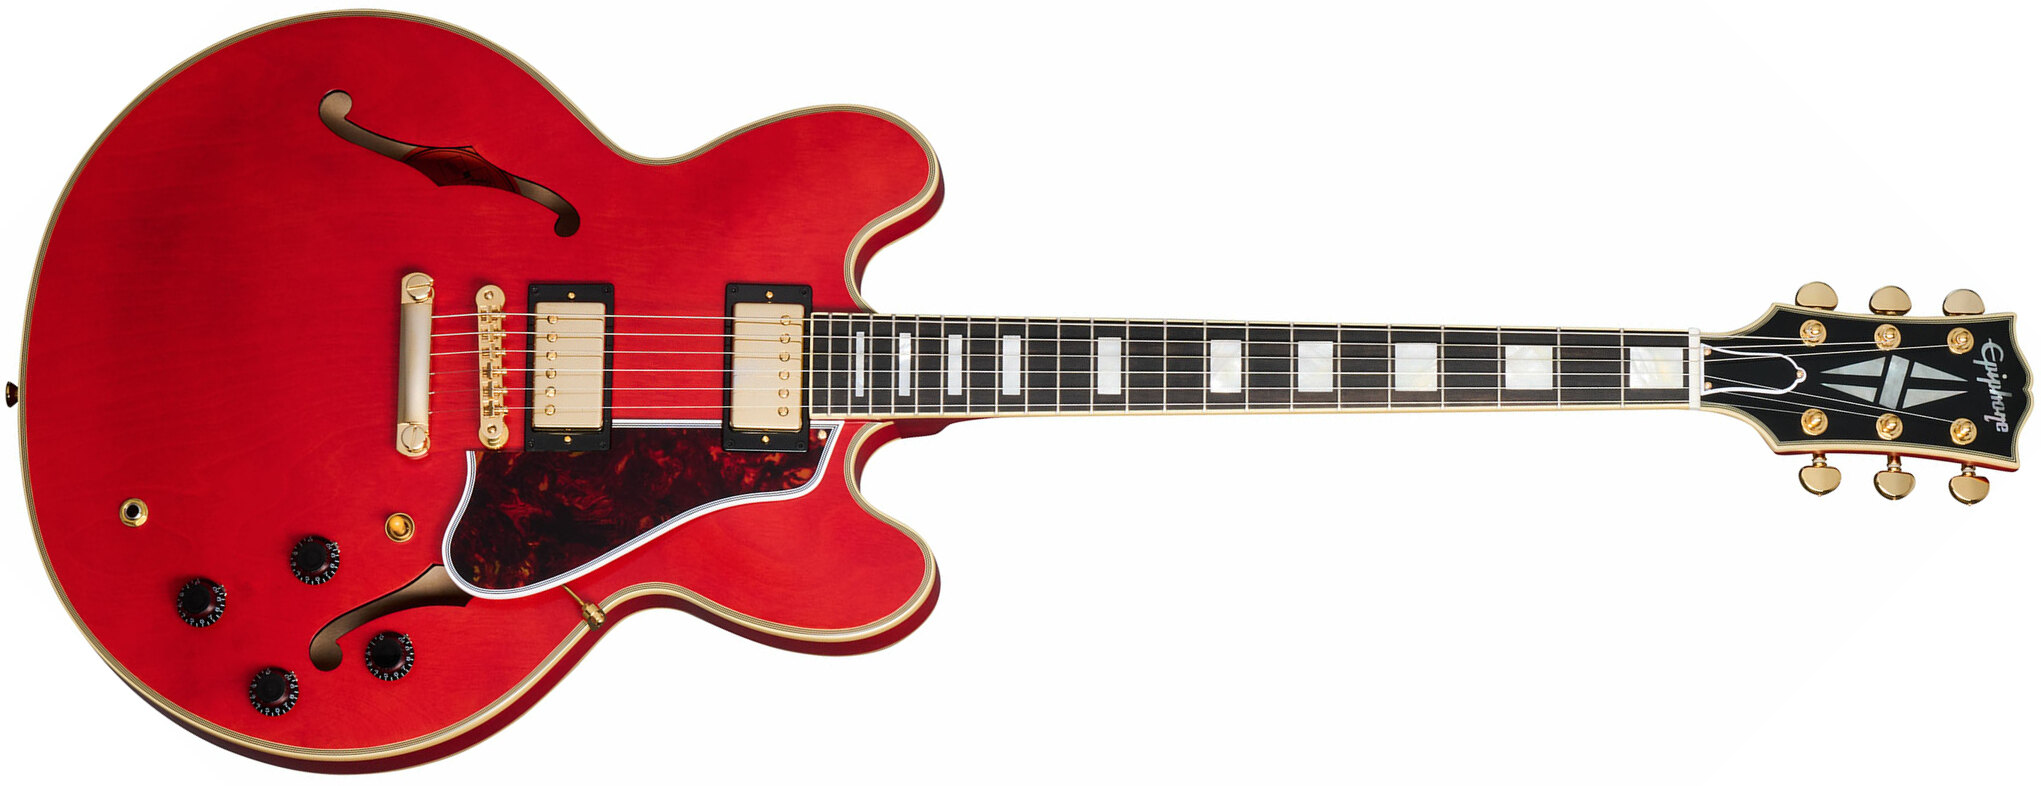 Epiphone Es355 1959 Inspired By 2h Gibson Ht Eb - Vos Cherry Red - Semi hollow elektriche gitaar - Main picture